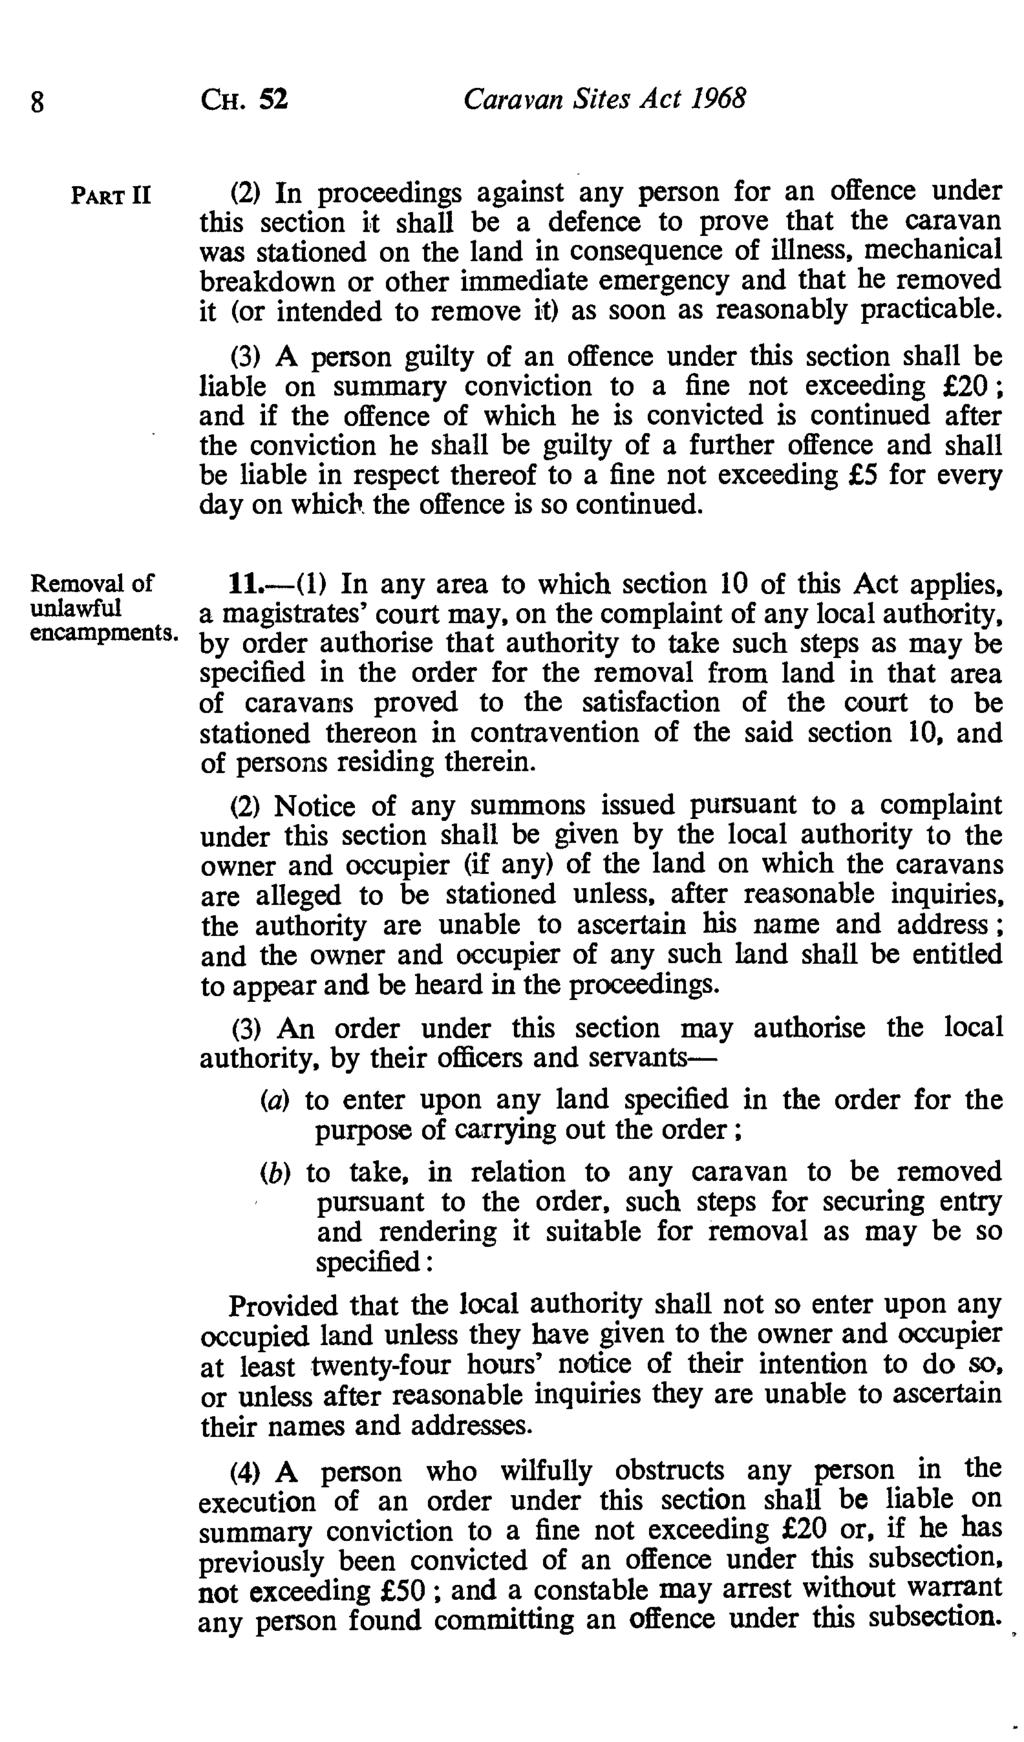 8 CH. 52 Caravan Sites Act 1968 PART II (2) In proceedings against any person for an offence under this section it shall be a defence to prove that the caravan was stationed on the land in